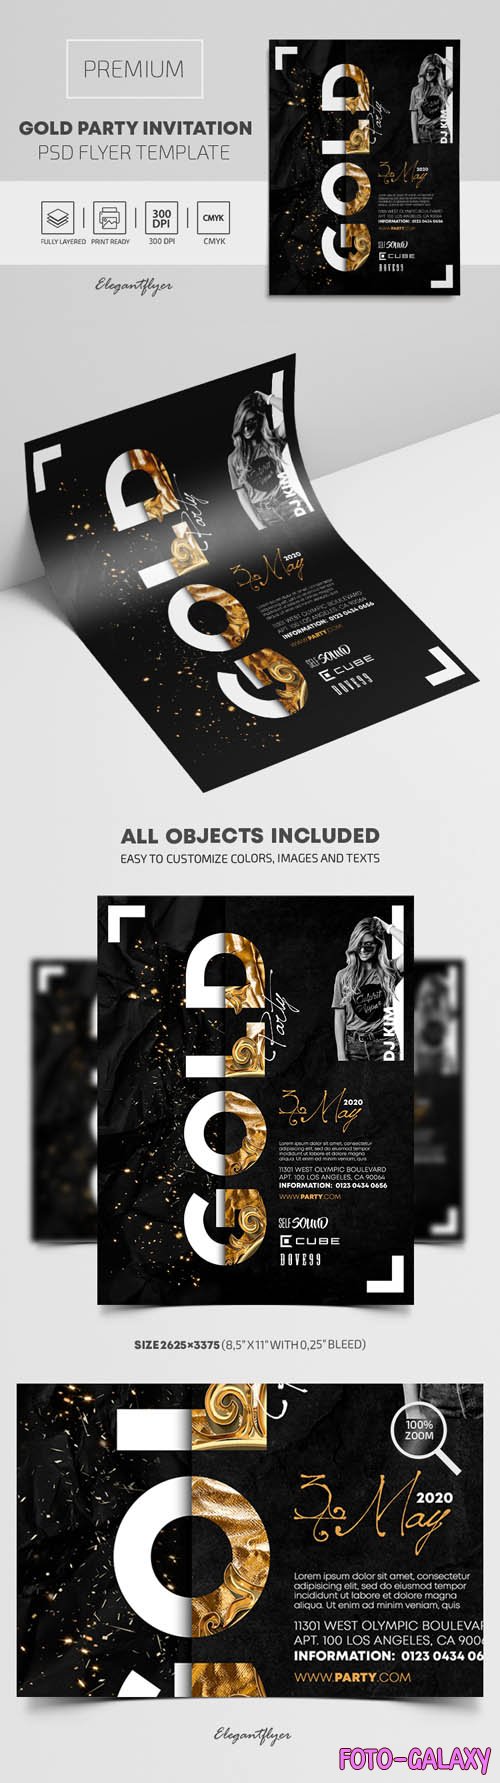 Gold Party Invitation Premium PSD Flyer Template